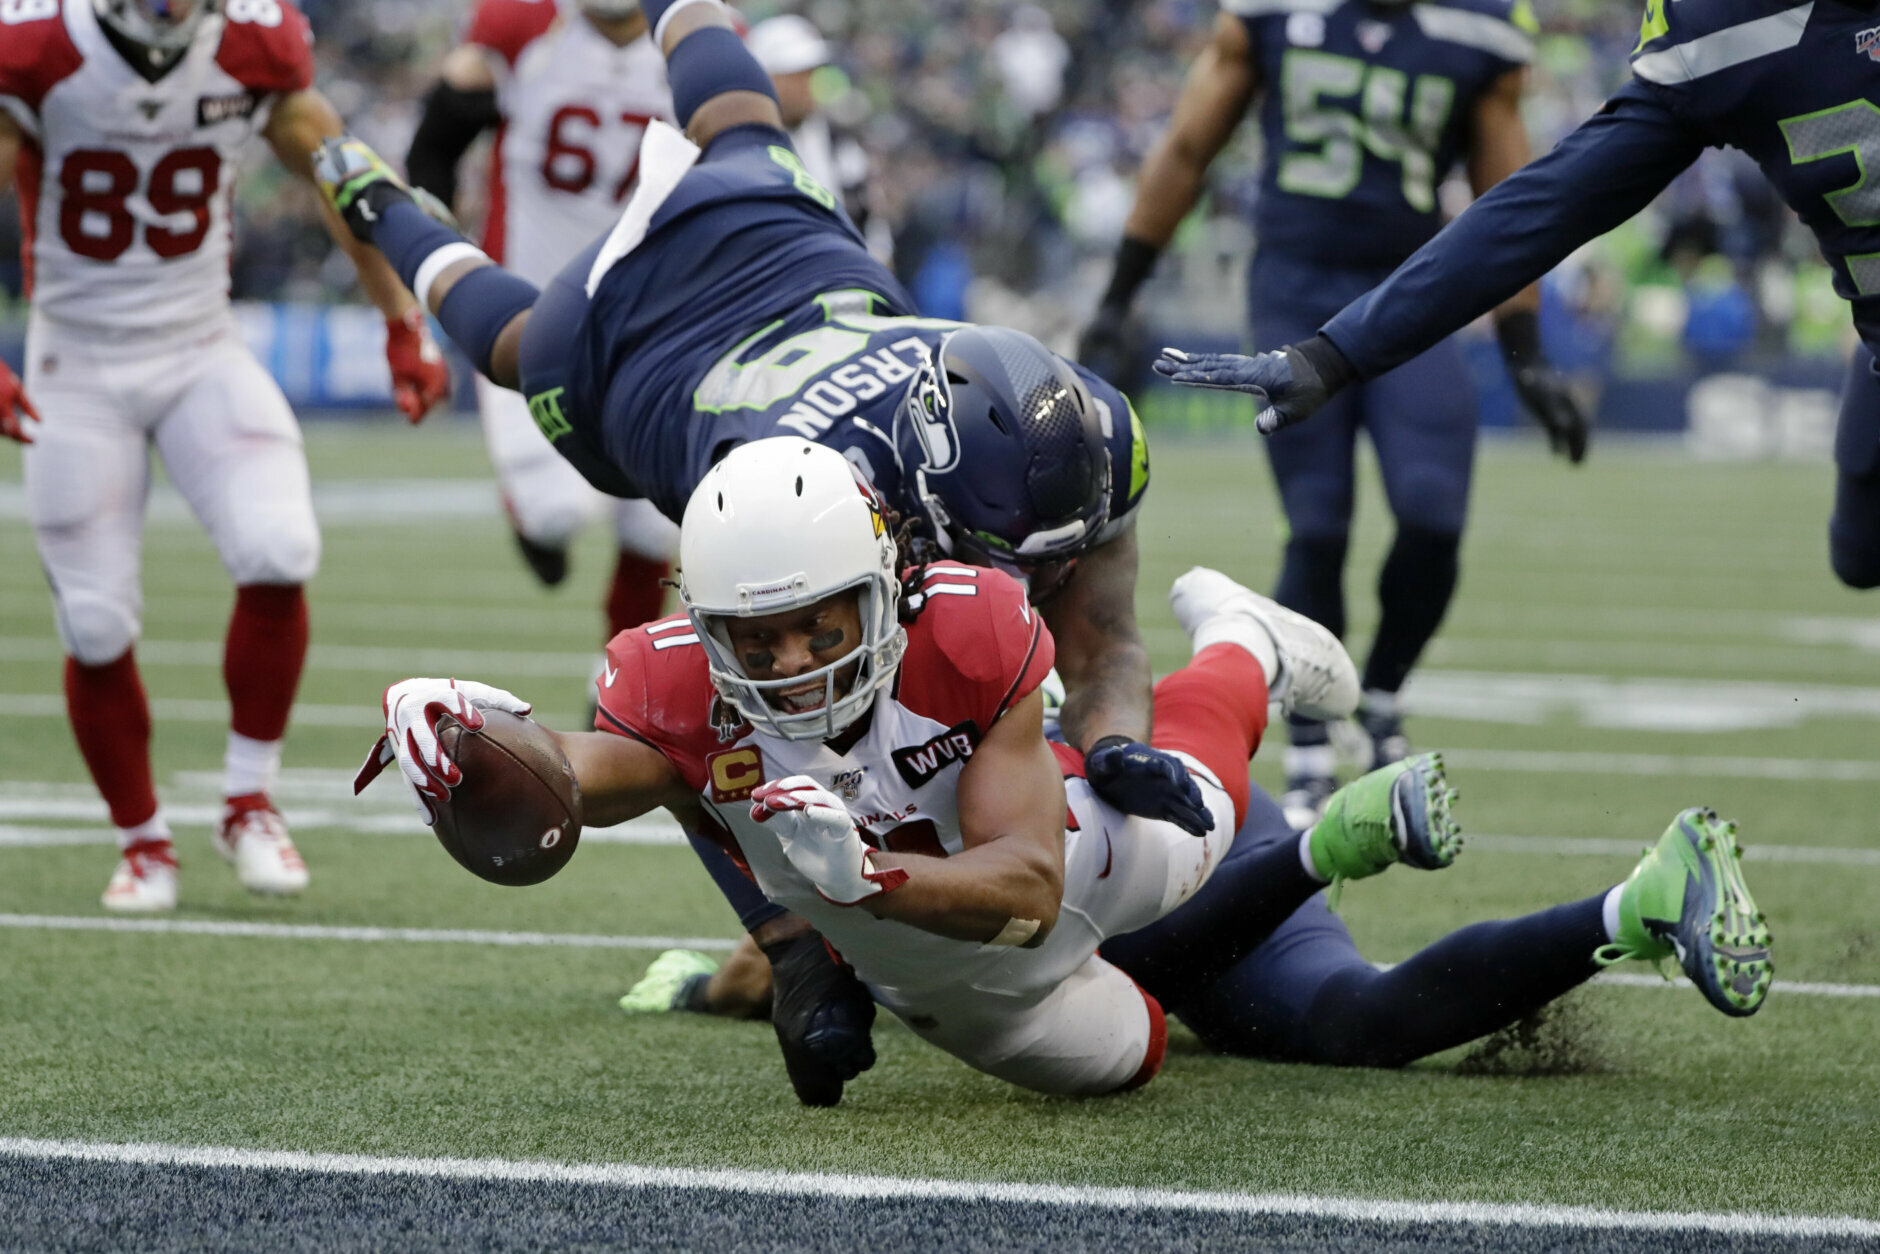 <p><b><i>Cardinals 27</i></b><br />
<b><i>Seahawks 13</i></b></p>
<p>In the most stunning upset of the day, Seattle apparently misinterpreted <a href="https://profootballtalk.nbcsports.com/2019/12/20/pete-carroll-it-would-really-be-ok-if-we-could-win-by-a-lot-sometimes/" target="_blank" rel="noopener" data-saferedirecturl="https://www.google.com/url?q=https://profootballtalk.nbcsports.com/2019/12/20/pete-carroll-it-would-really-be-ok-if-we-could-win-by-a-lot-sometimes/&amp;source=gmail&amp;ust=1577160325113000&amp;usg=AFQjCNFaLtmaF8GUH6LTNN096f9IpsQD-A">Pete Carroll&#8217;s plea</a> for a blowout. The Seahawks need only beat the 49ers at CenturyLink Field to clinch the division, and perhaps, home-field advantage, but with three home losses already, is anyone particularly confident that matters to Seattle anymore?</p>
